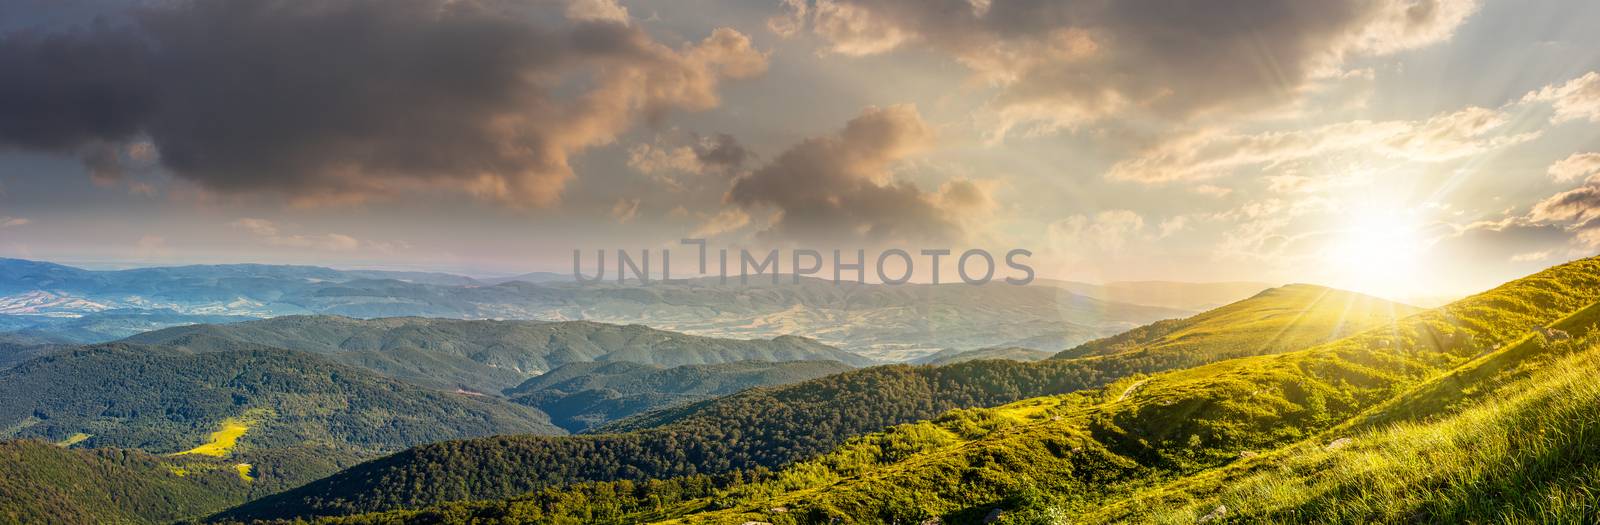 hillside panorama in Carpathian mountains at sunset by Pellinni